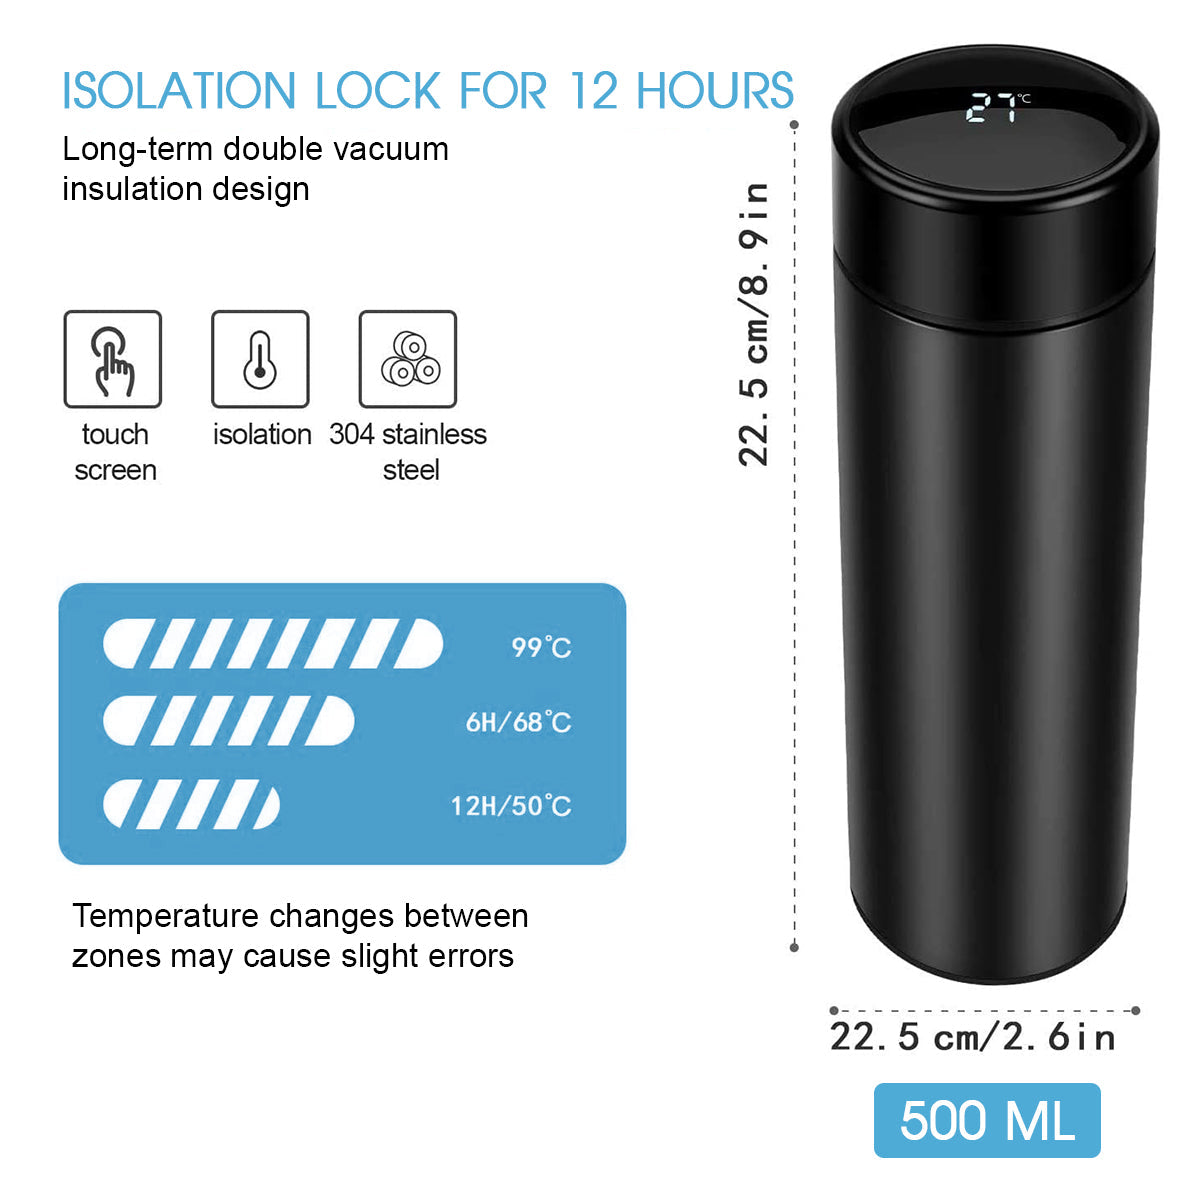 17oz Insulated Water Bottle with LED Temperature Display, Custom fit for Cars, Coffee Tea Infuser Bottle Double Wall Vacuum Insulated Water Bottle for Hot or Cold Drink